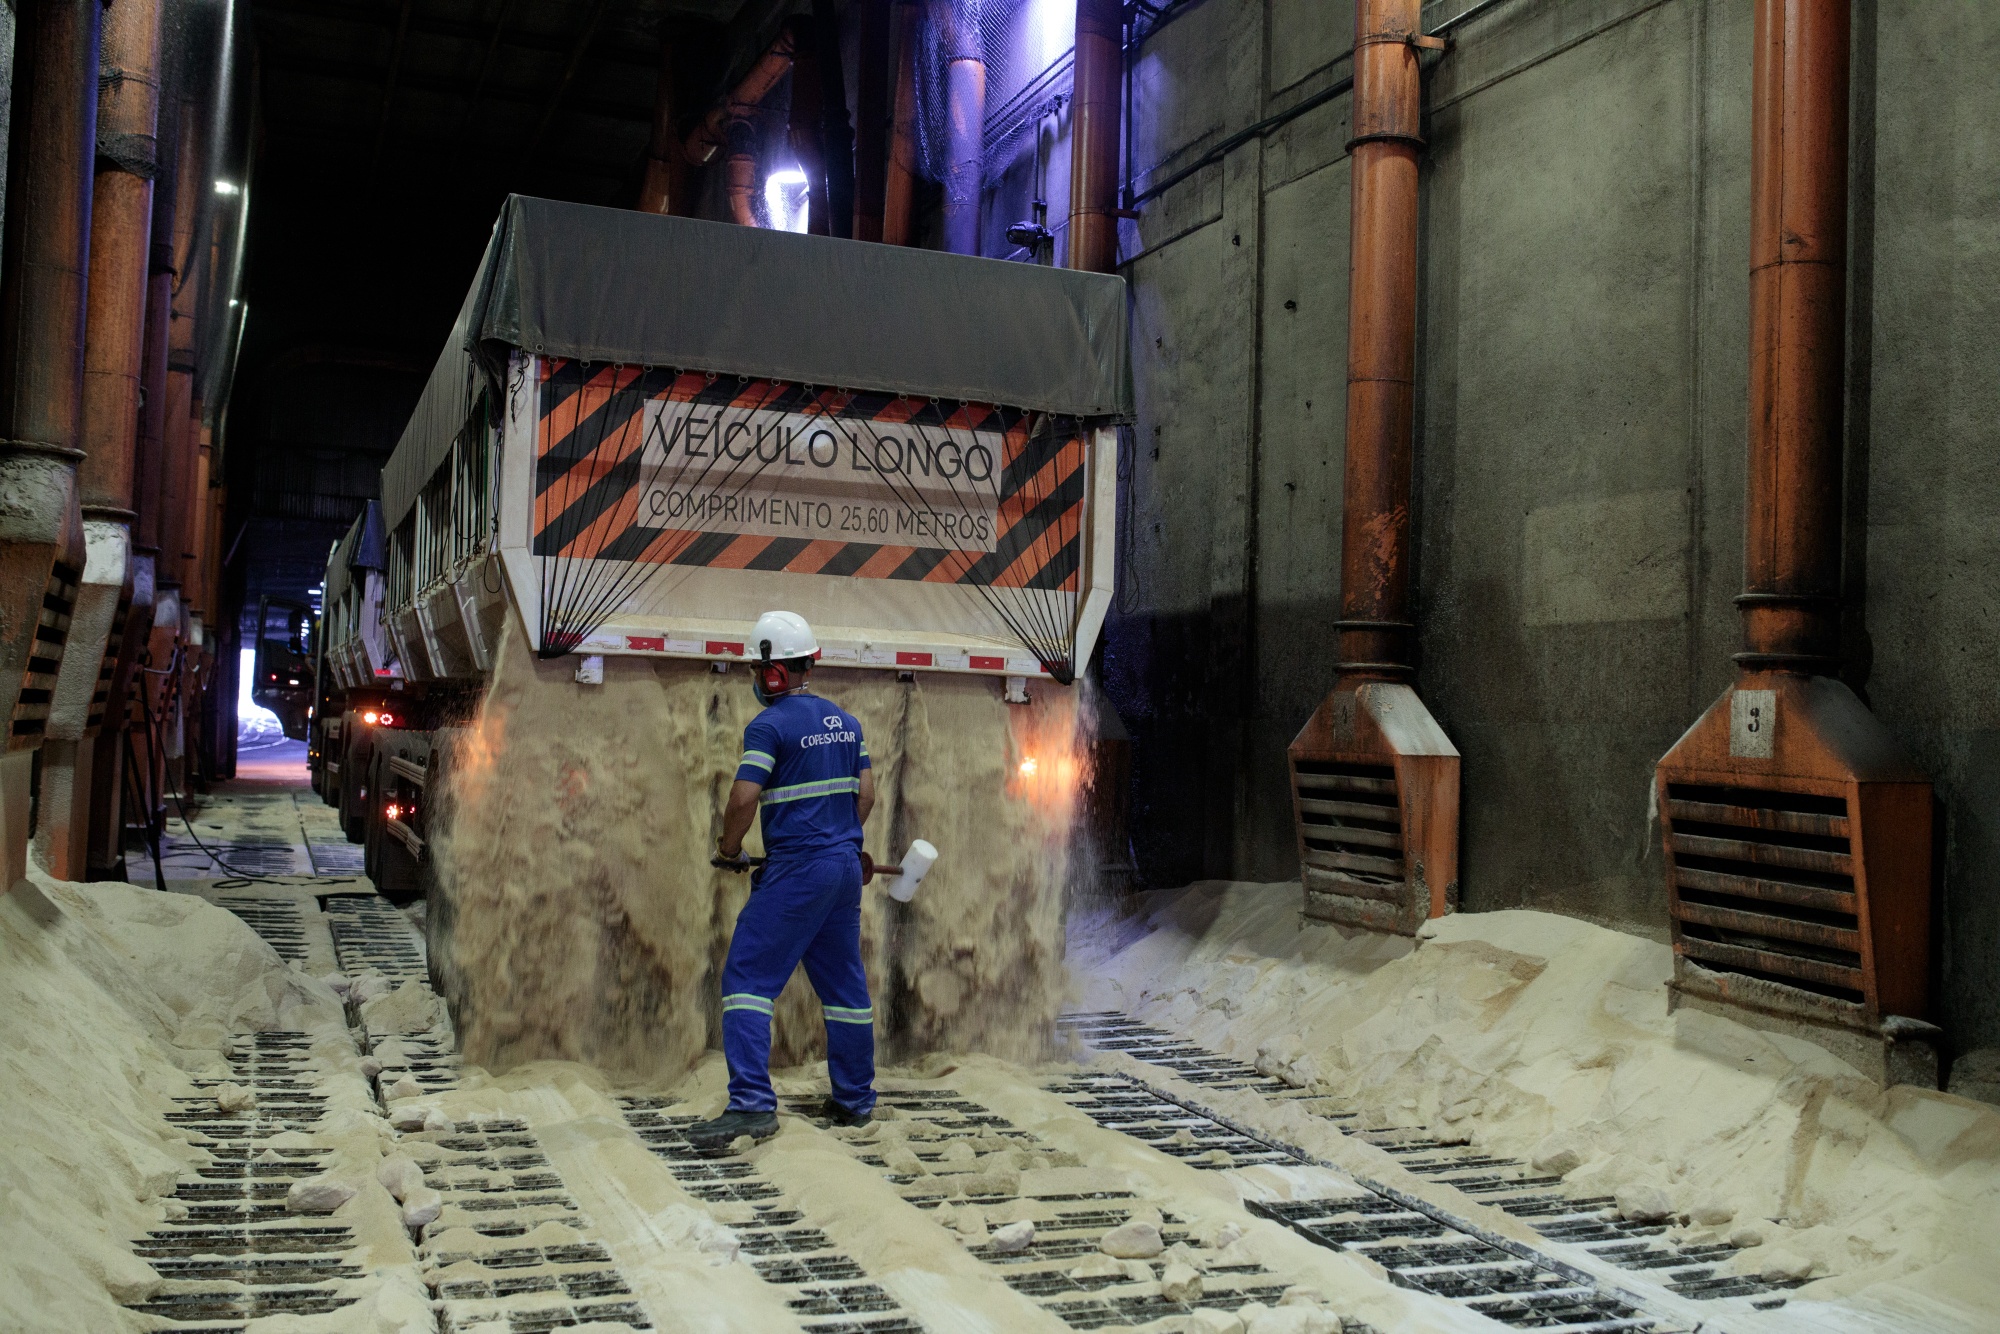 Brazil Inches Closer to Unseating US as Top Cotton Exporter - Bloomberg